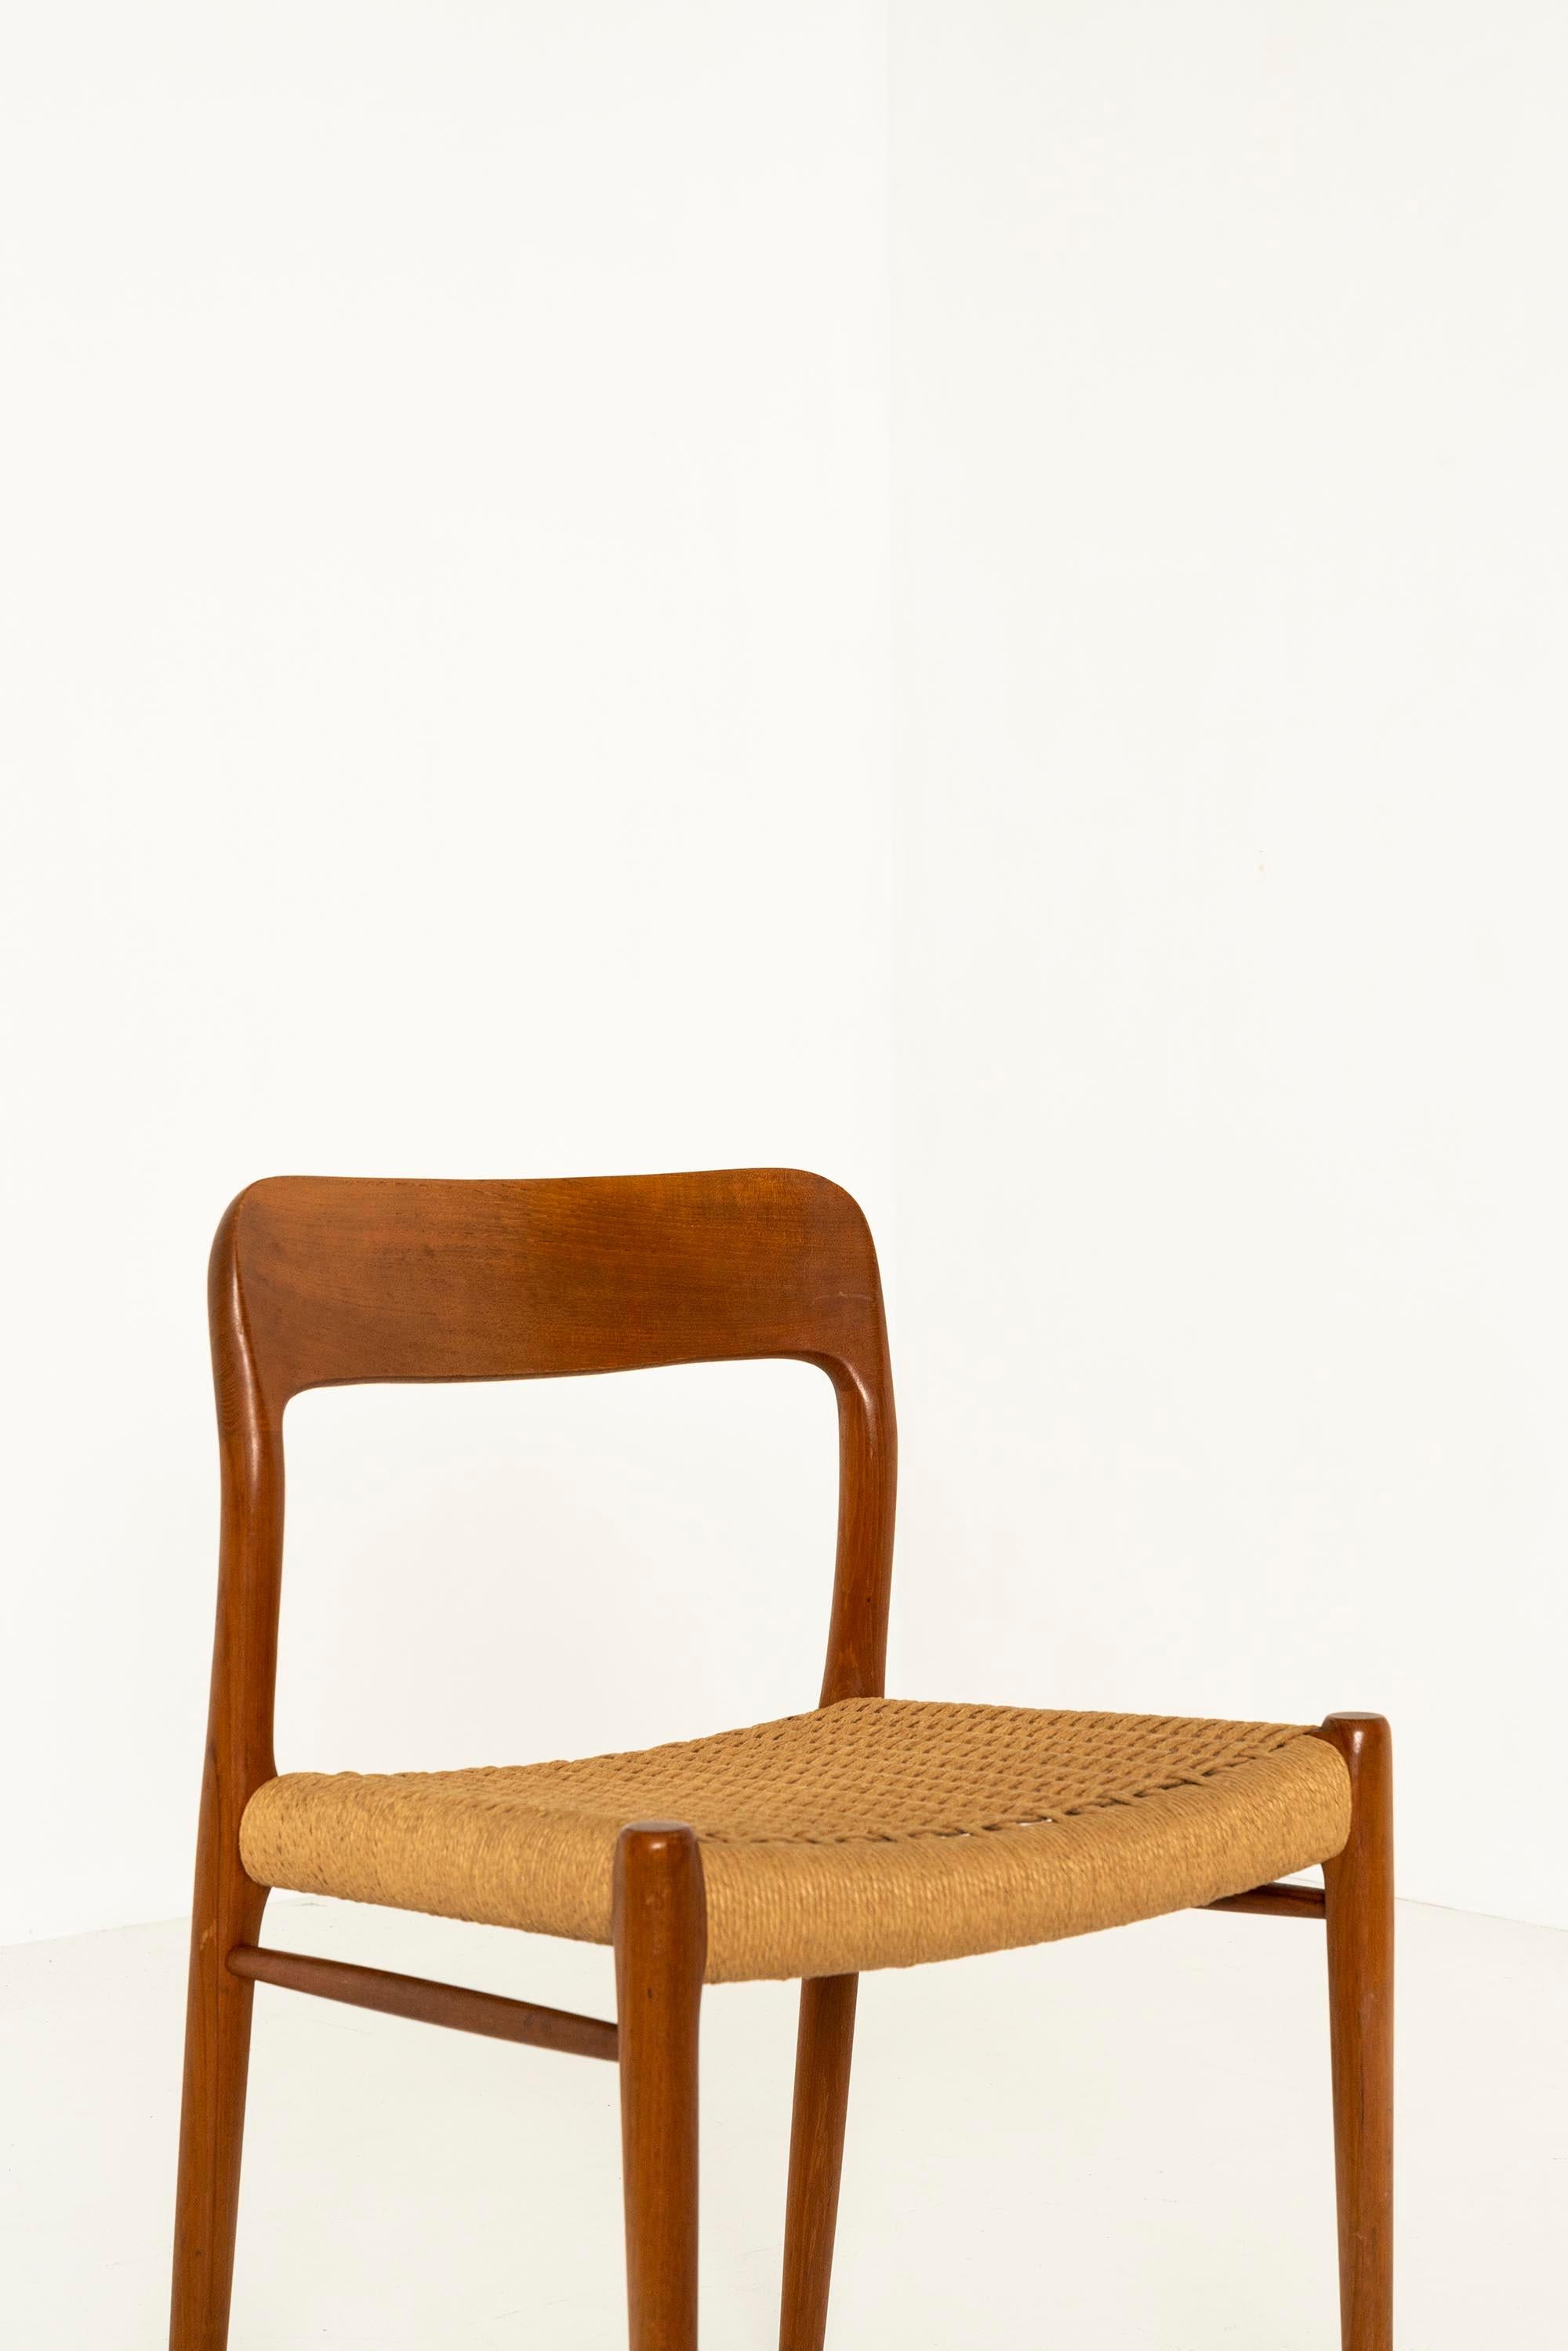 10 Niels Otto Møller 'Model 75' Chairs in Teak and Danish Paper Cord, 1960s For Sale 4